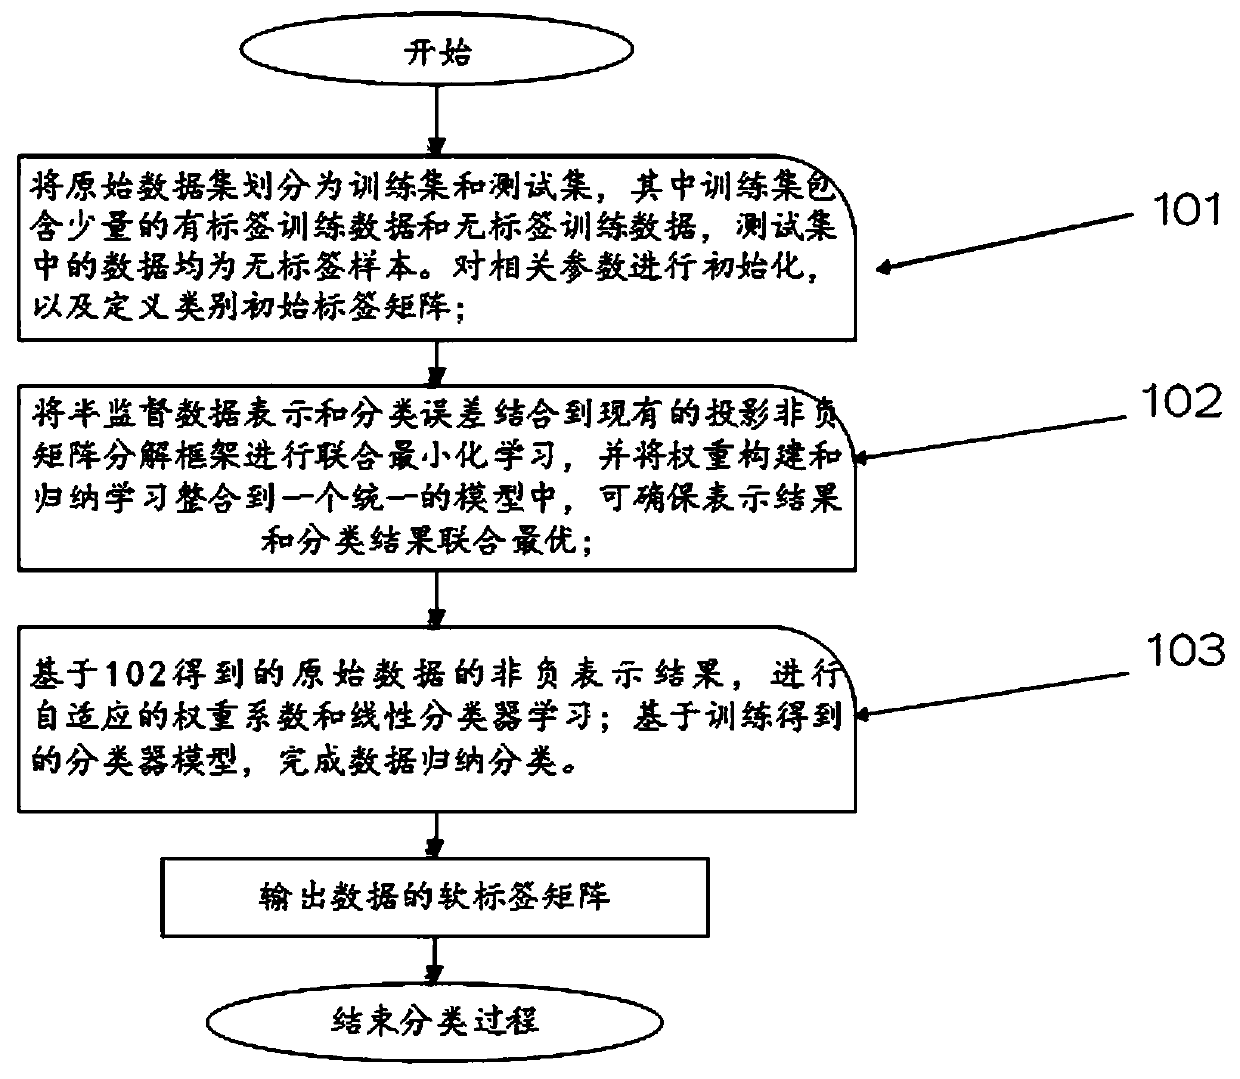 Inductive non-negative projection semi-supervised data classification method and system